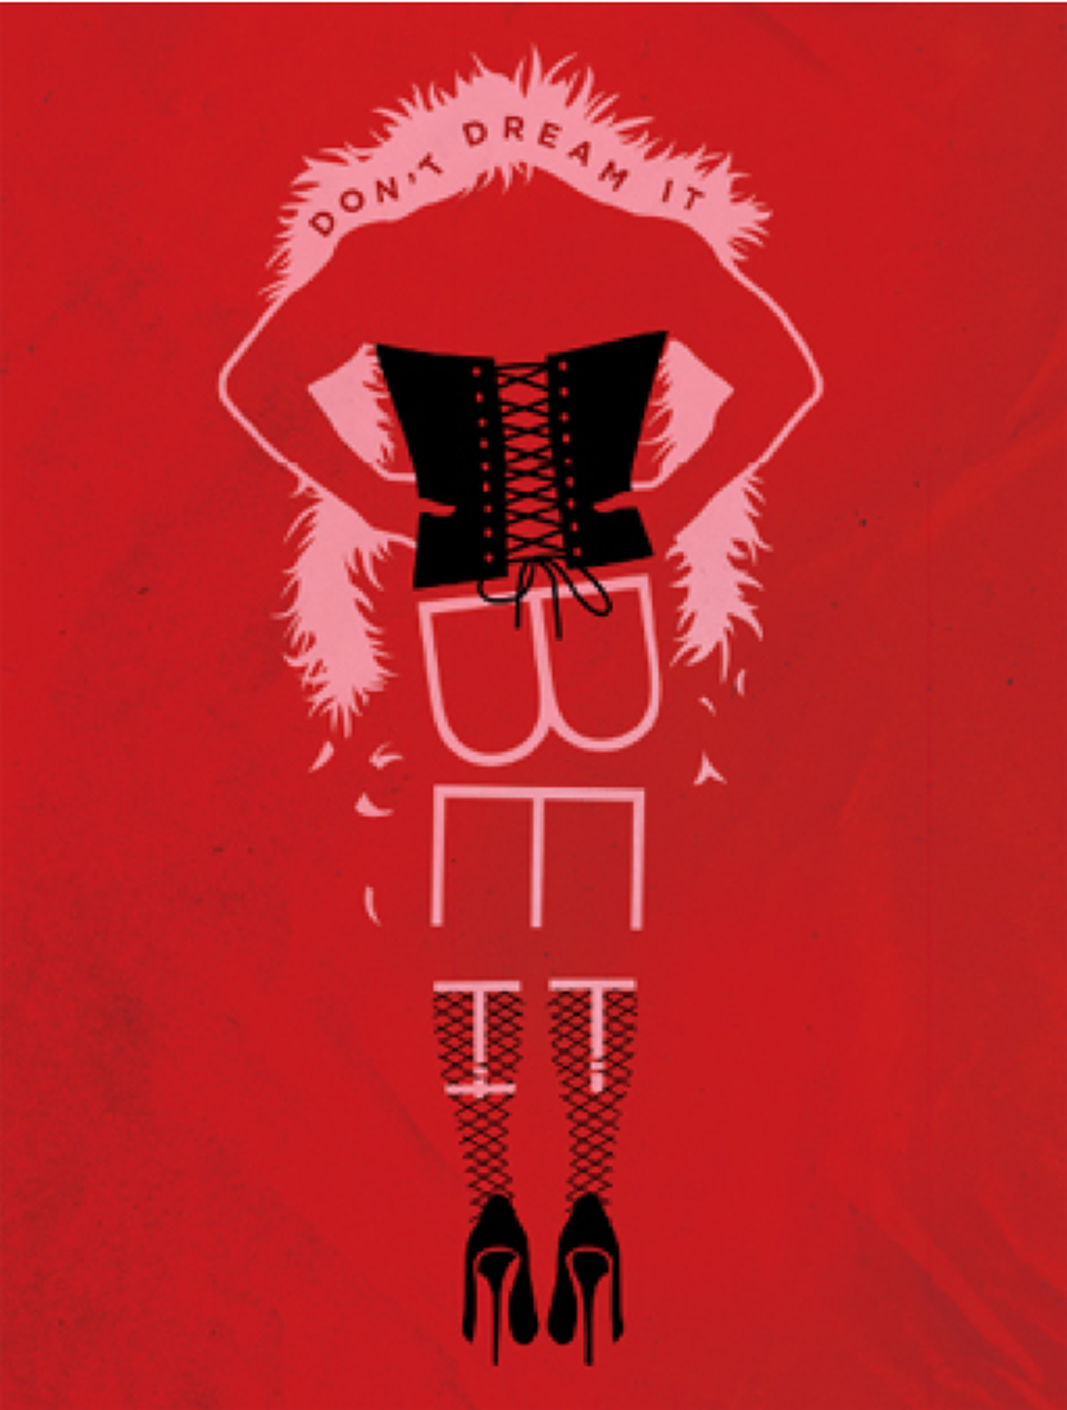 Typeface Tuesdays: Don't Dream It, Be It. Rocky horror show